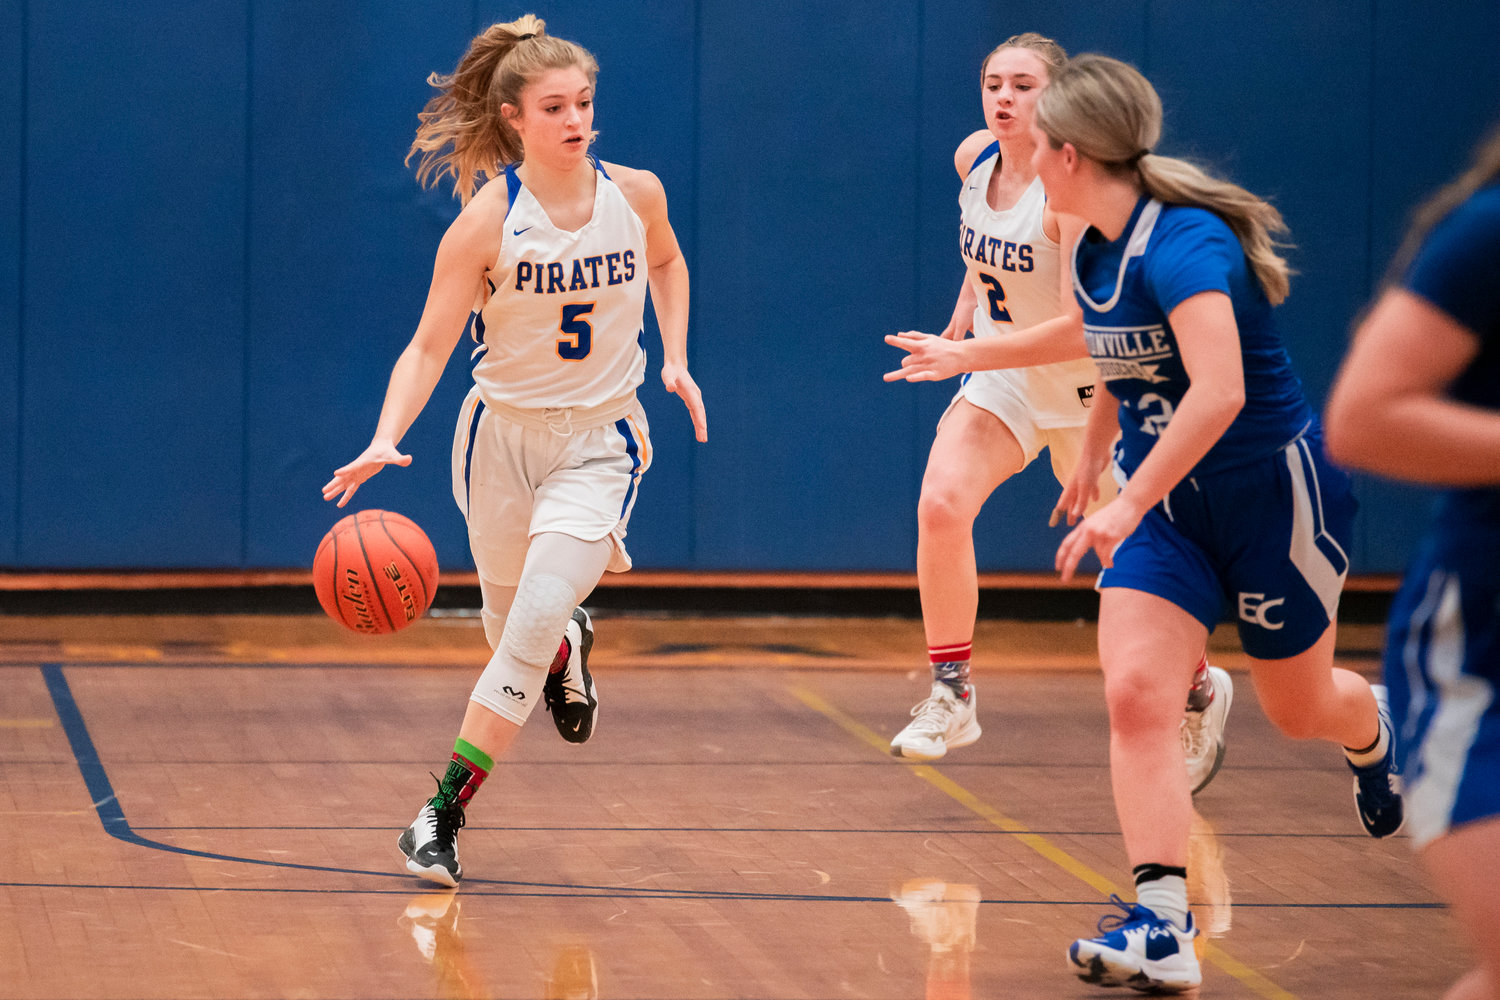 Adna’s Kaylin Todd (5) dribbles the ball down the court during a game against Eatonville Friday night.